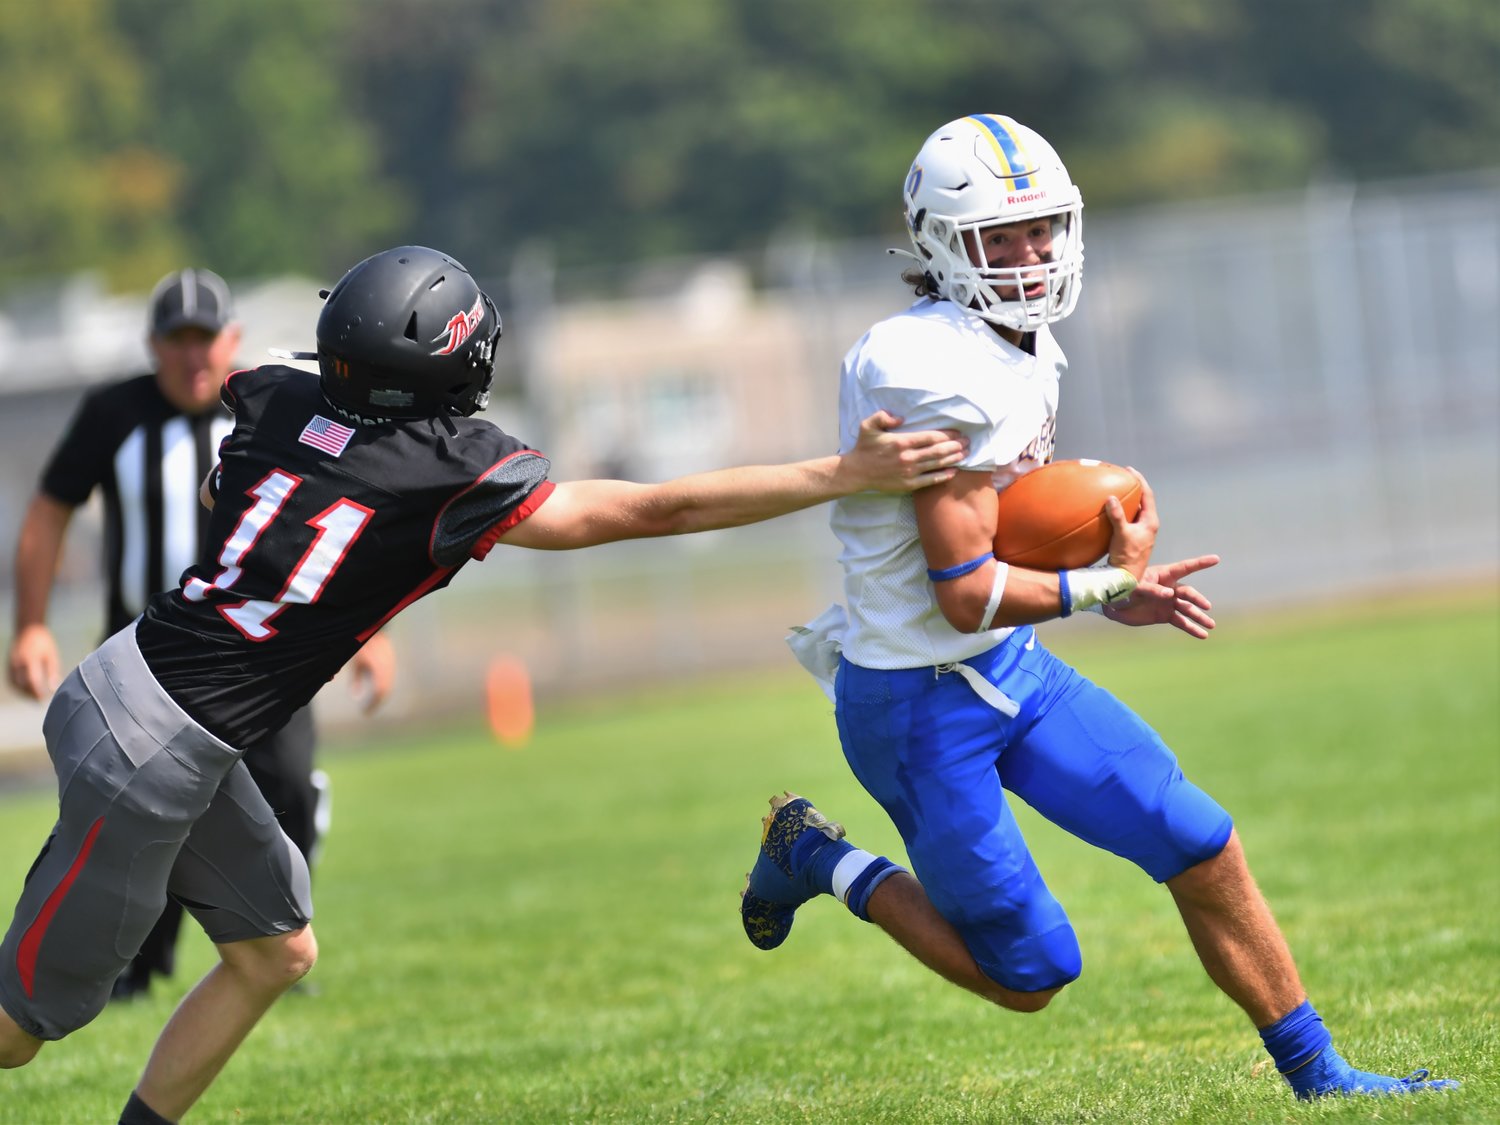 Rochester tailback Talon Betts evades an R.A. Long defender during the Warriors' season opener Saturday.